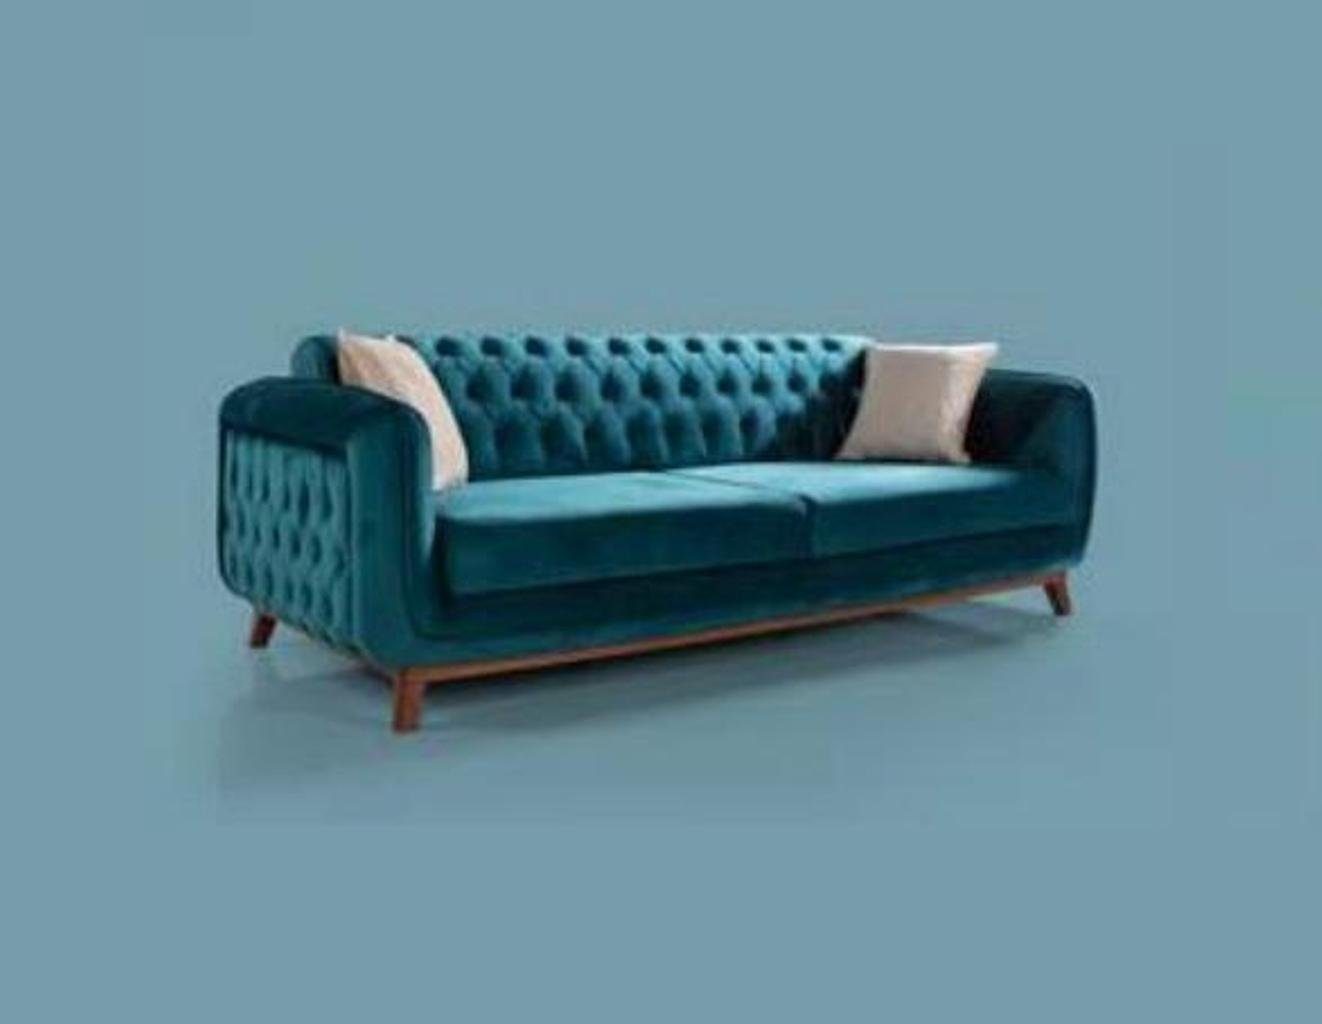 JVmoebel Couch Europe Chesterfield, Sofas in Polster Sofa Set 3+3+1 Stoff 3tlg Made Garnitur